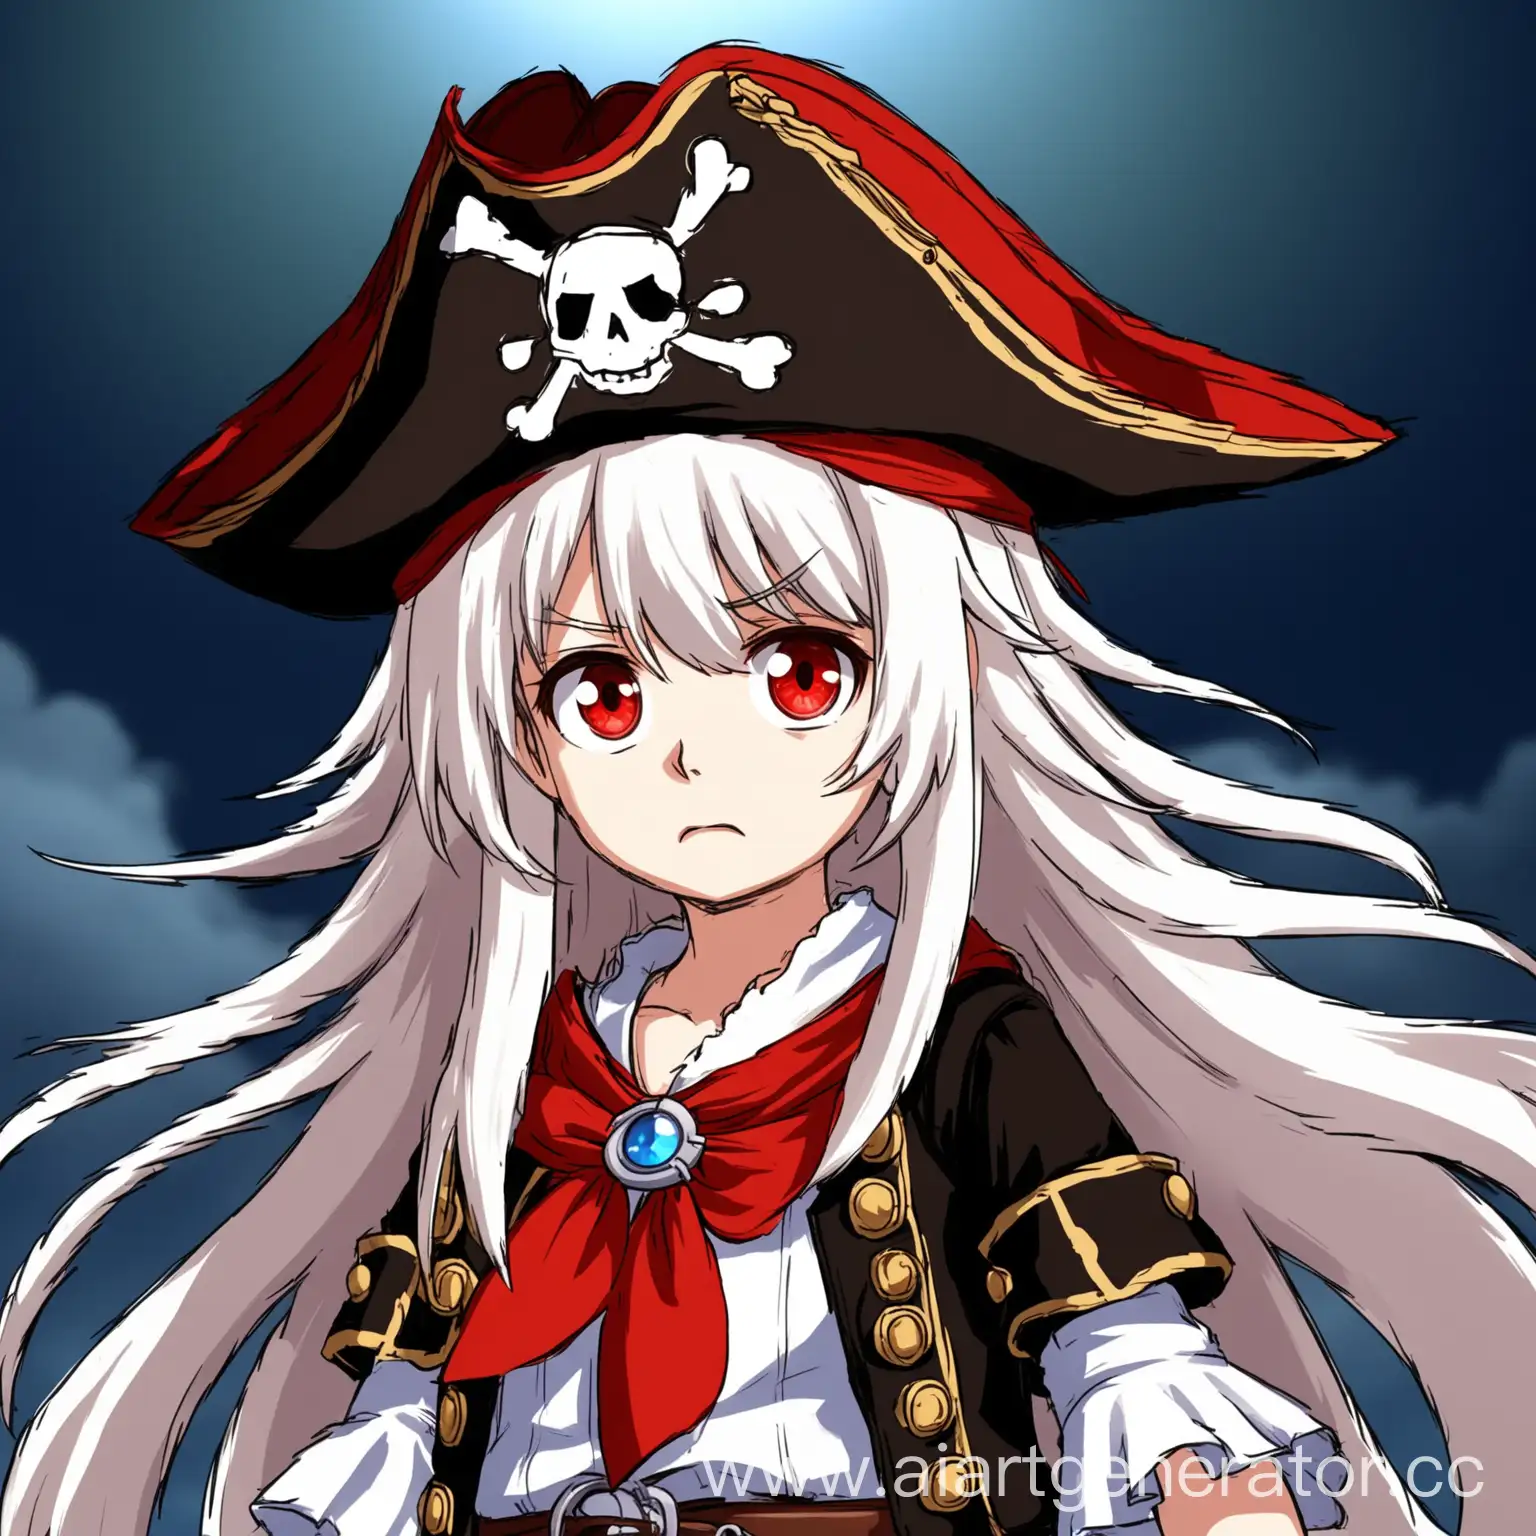 Young-Honkai-Star-Clara-in-Pirate-Costume-Displays-Fear-and-Naivety